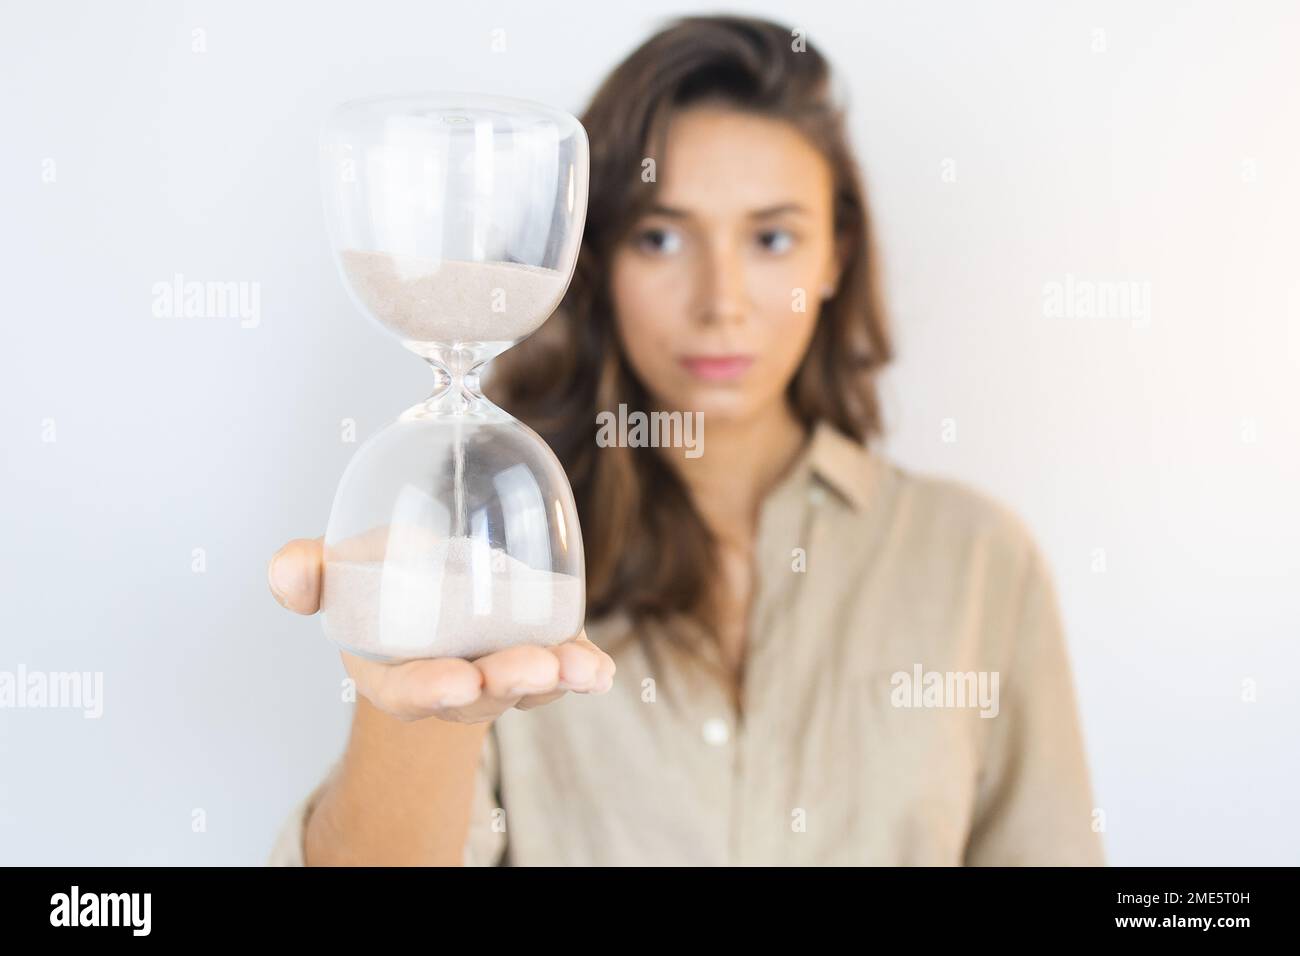 Young Woman Holding an Hourglass Aging Stock Photo